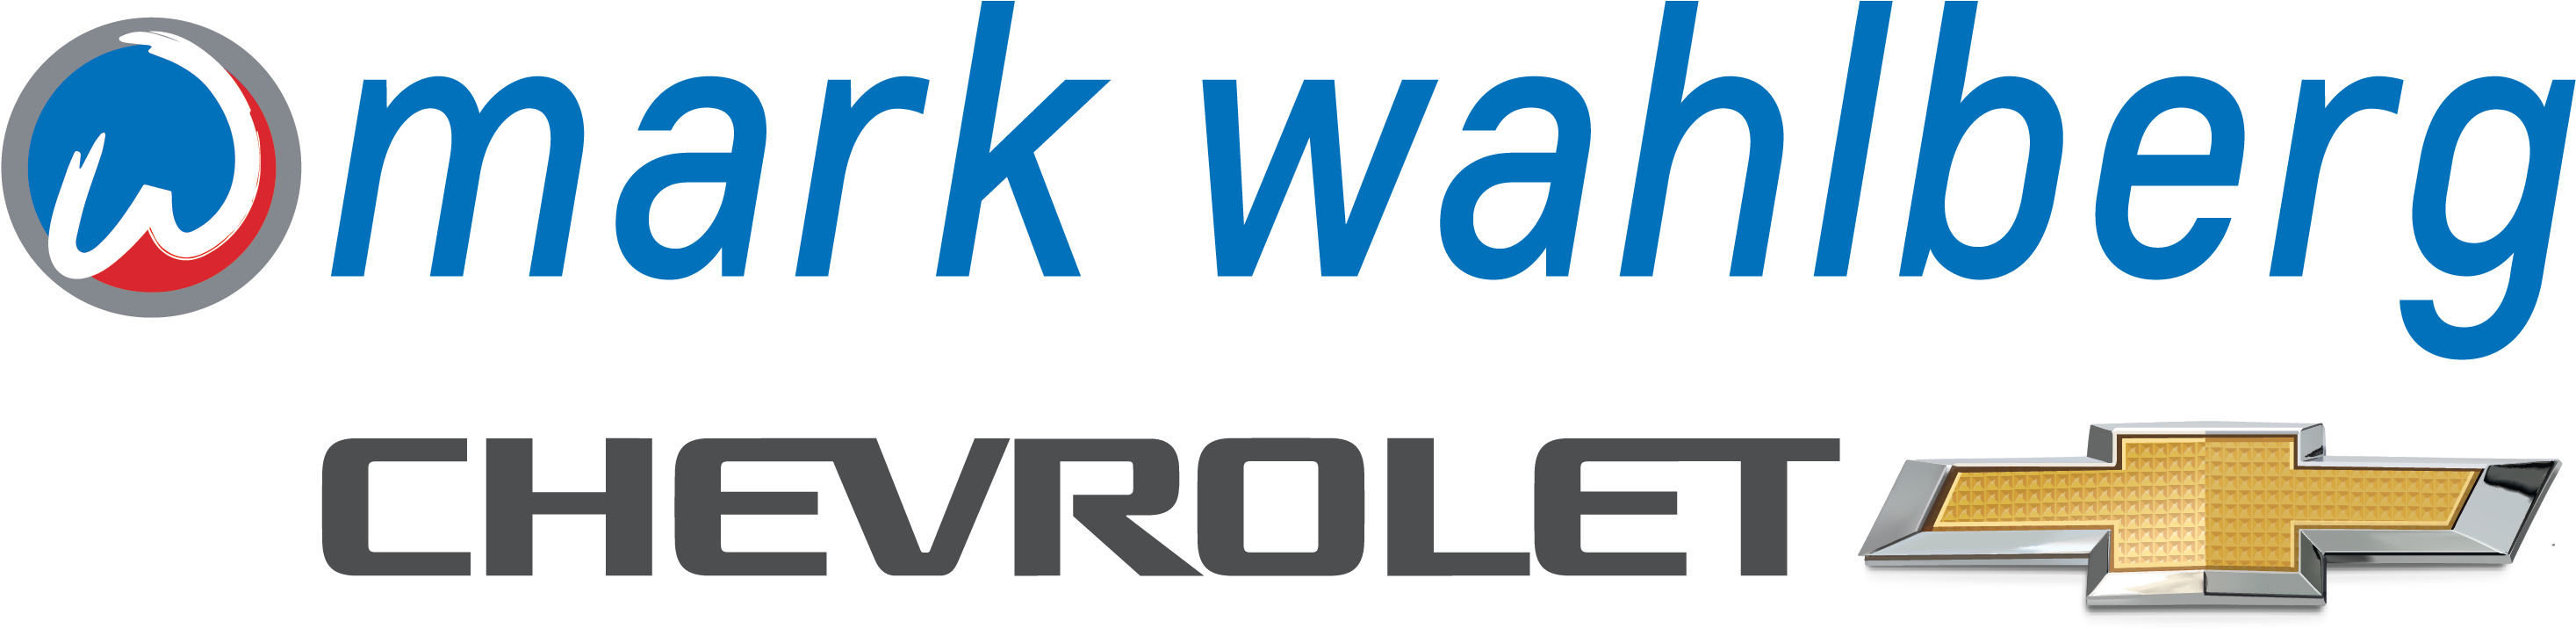 Mark Wahlberg Chevrolet Logo - Wahlberg Chevrolet Columbus Ohio (2971x752), Png Download